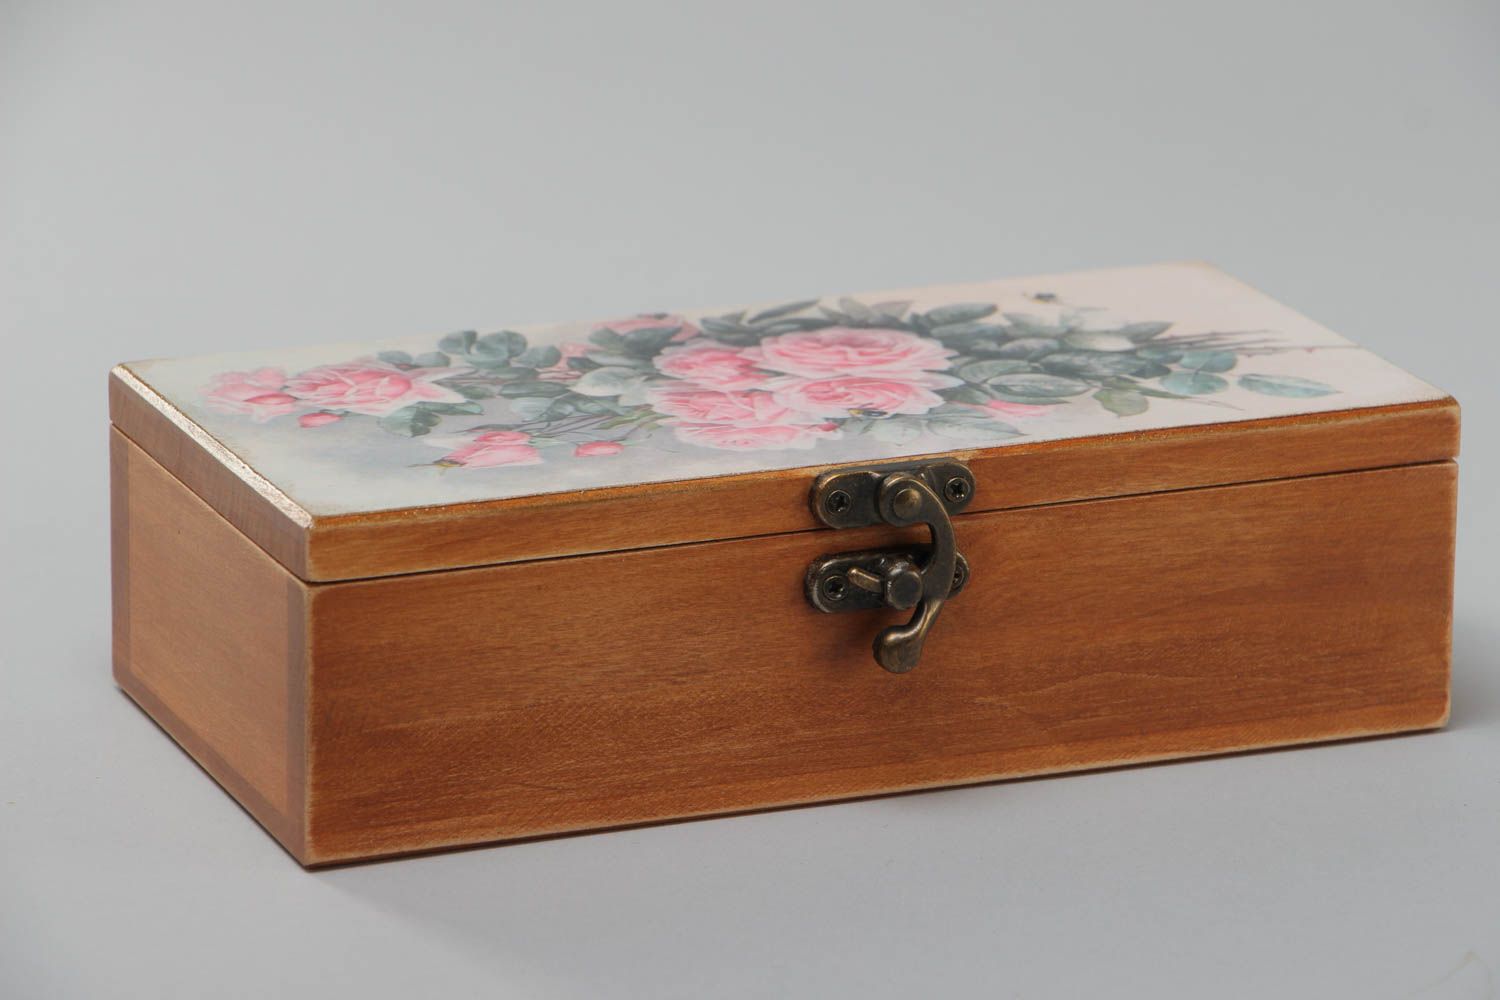 Handmade rectangular wooden jewelry box with floral print on a lid photo 4